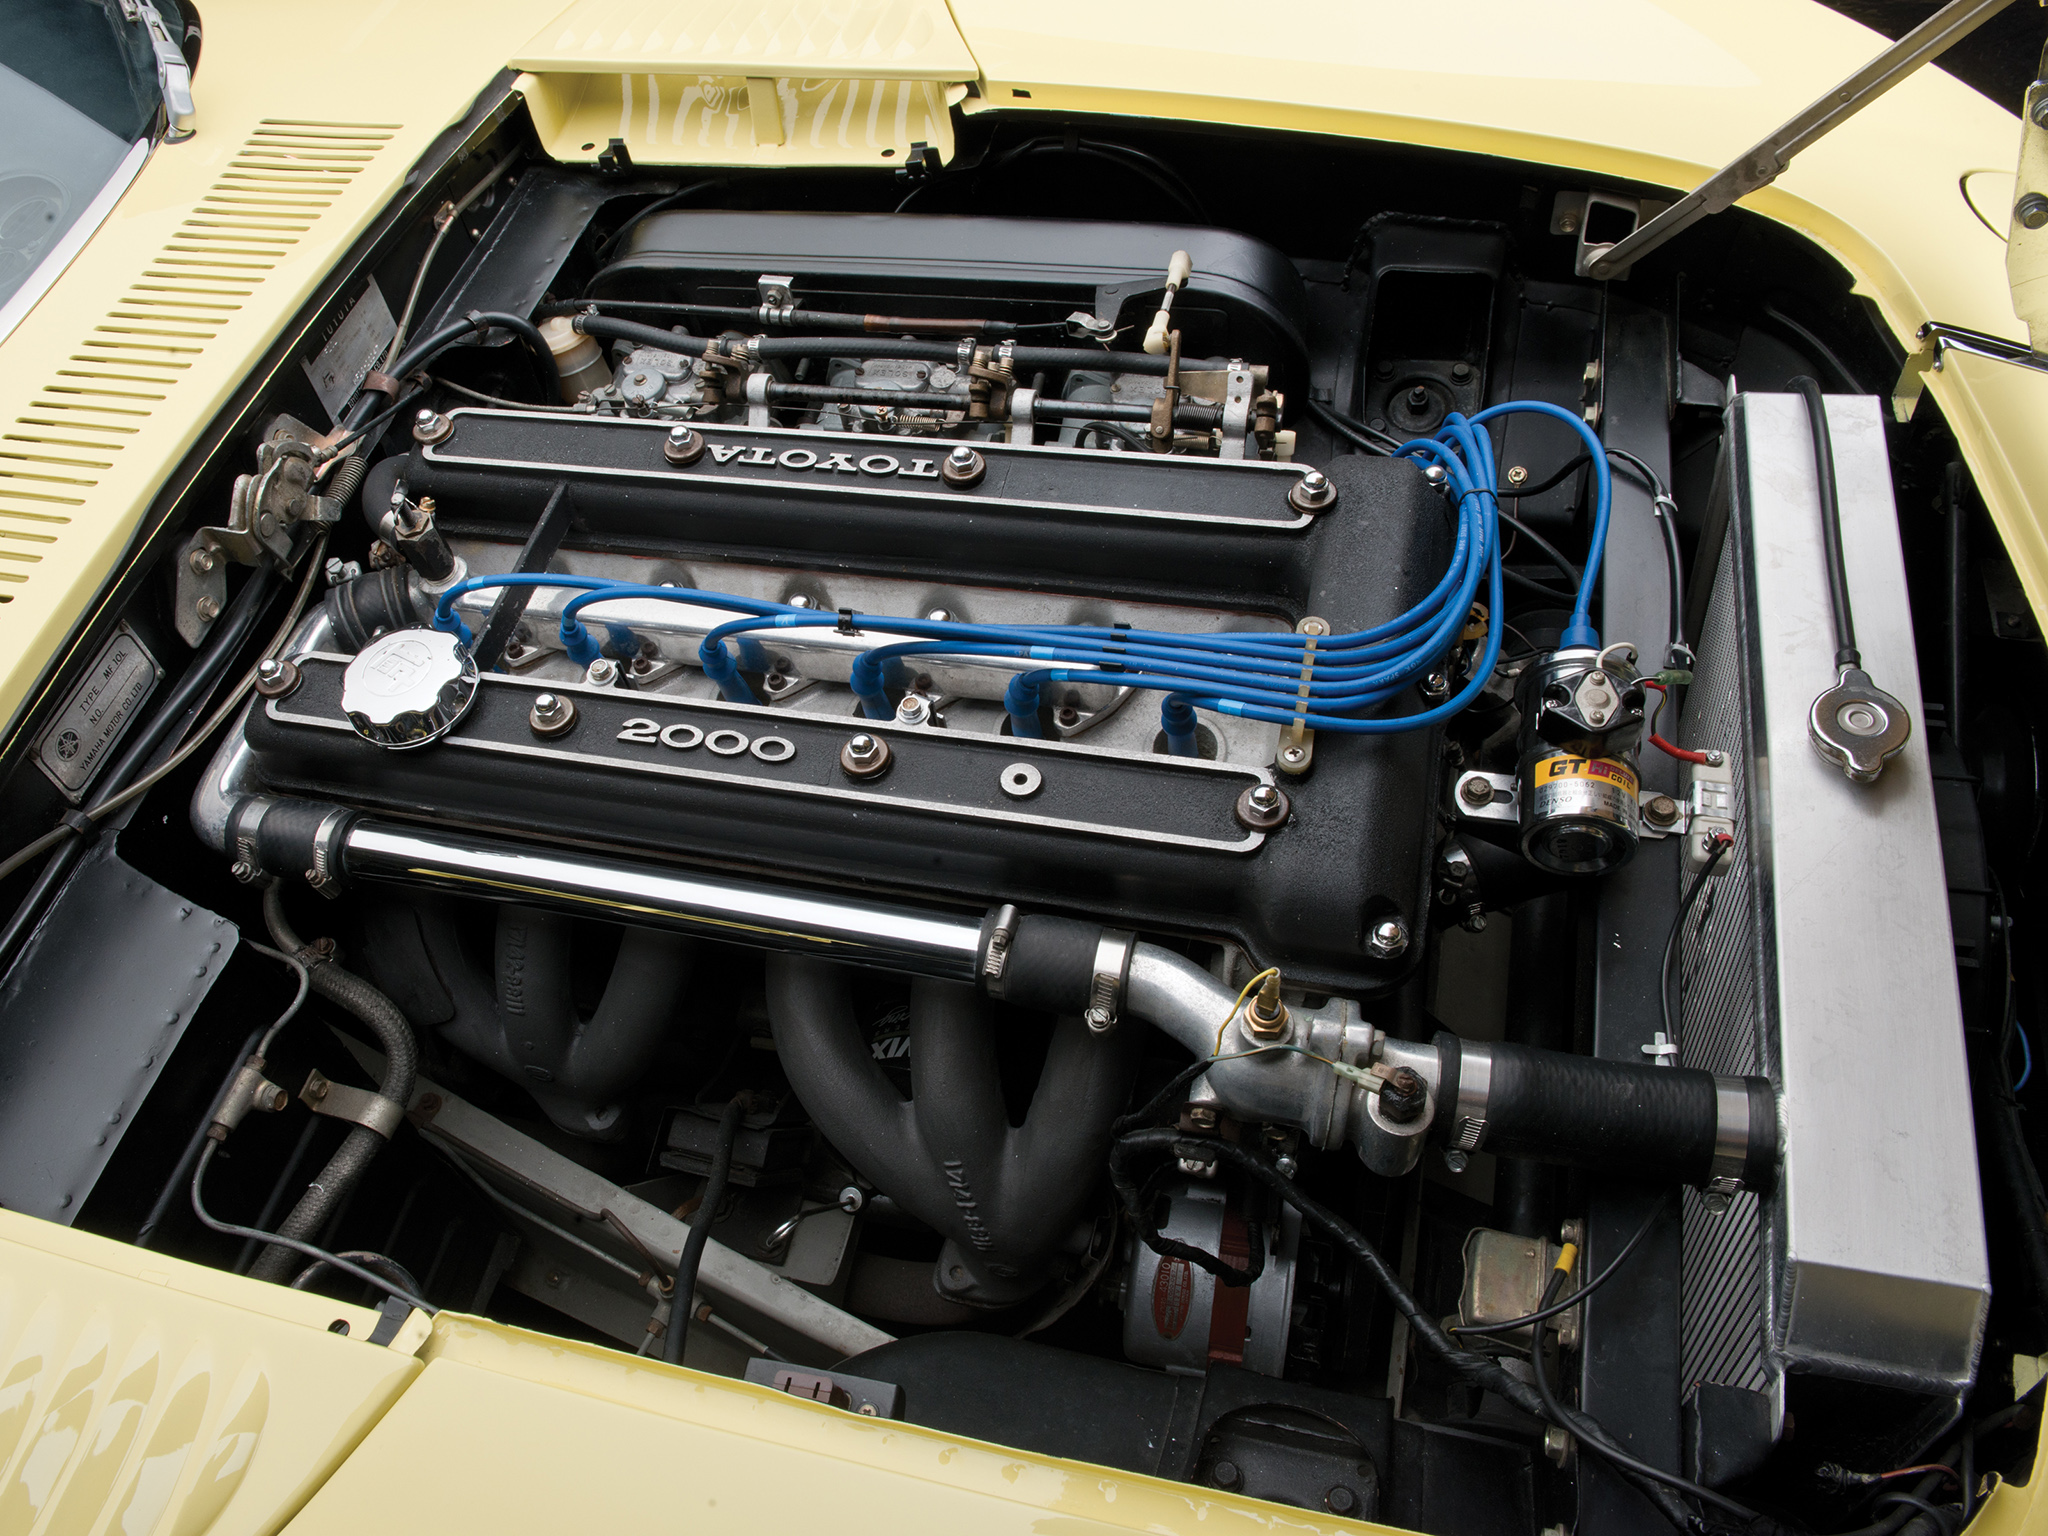 1967, Toyota, 2000gt, Us spec, Mf10, Supercar, Supercars, Classic, Engine, Engines Wallpaper